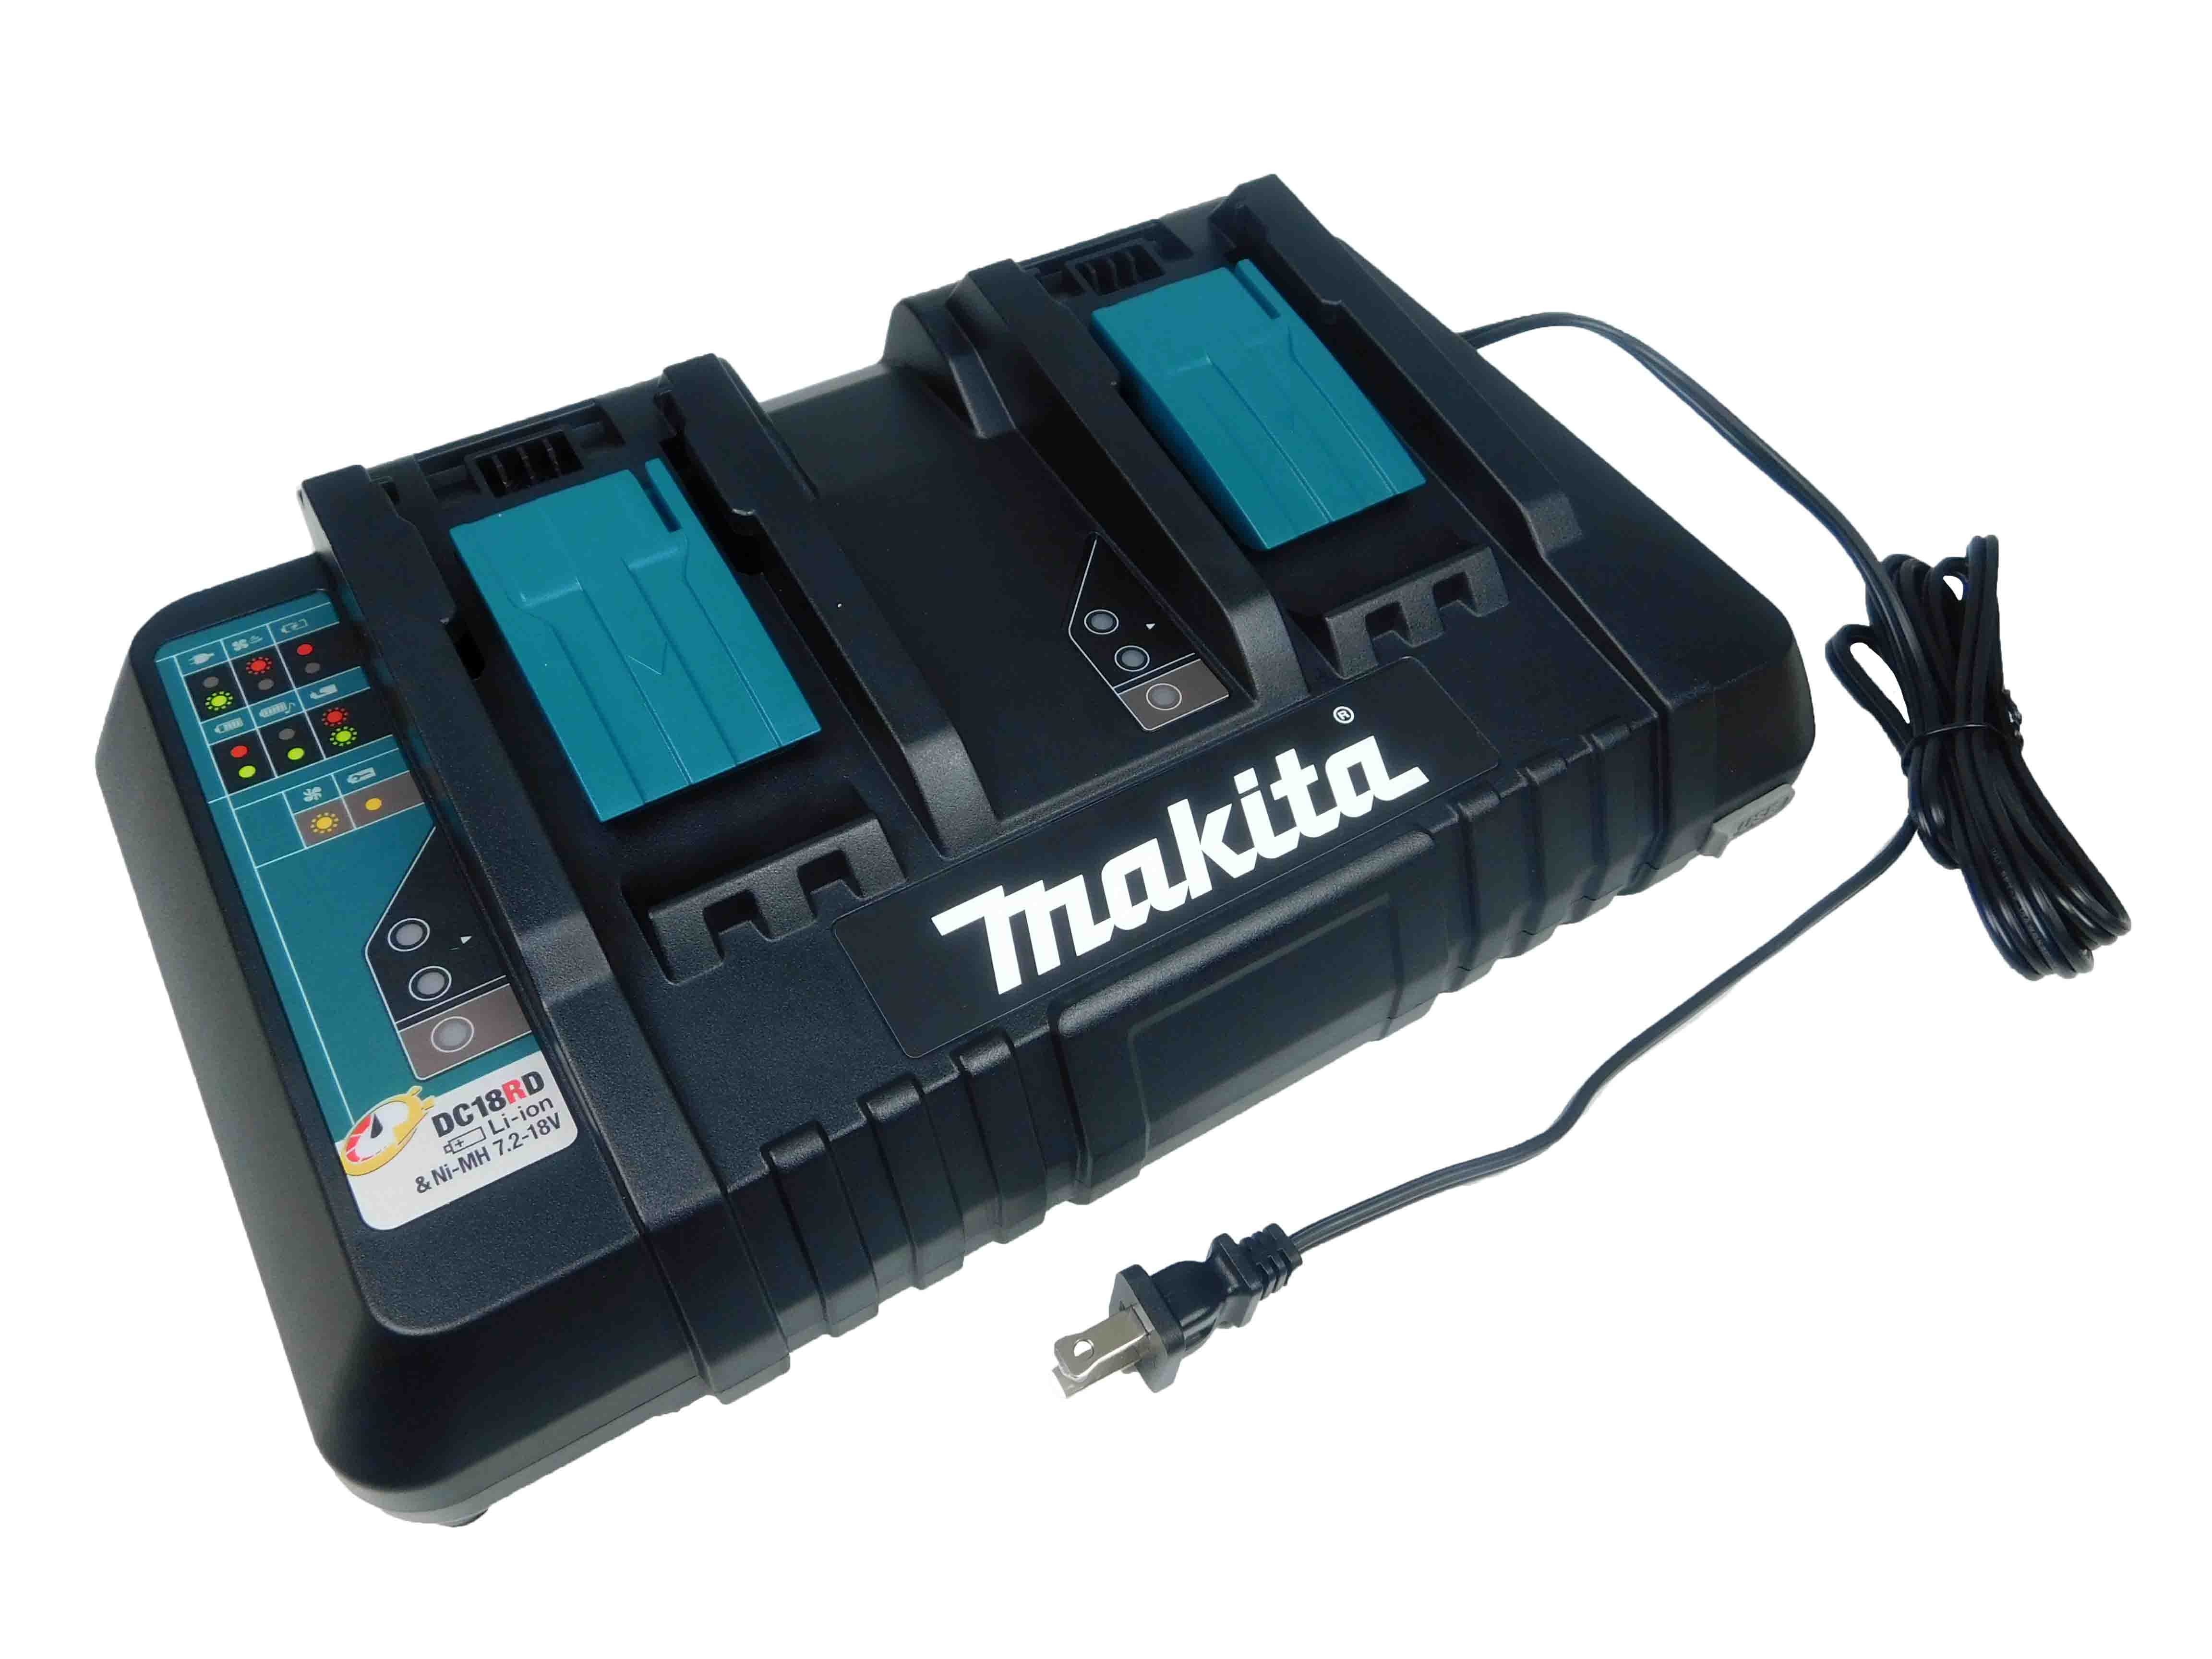 Makita DC18RD 18V Lithium-Ion Dual Port Rapid Optimum Charger with USB Port